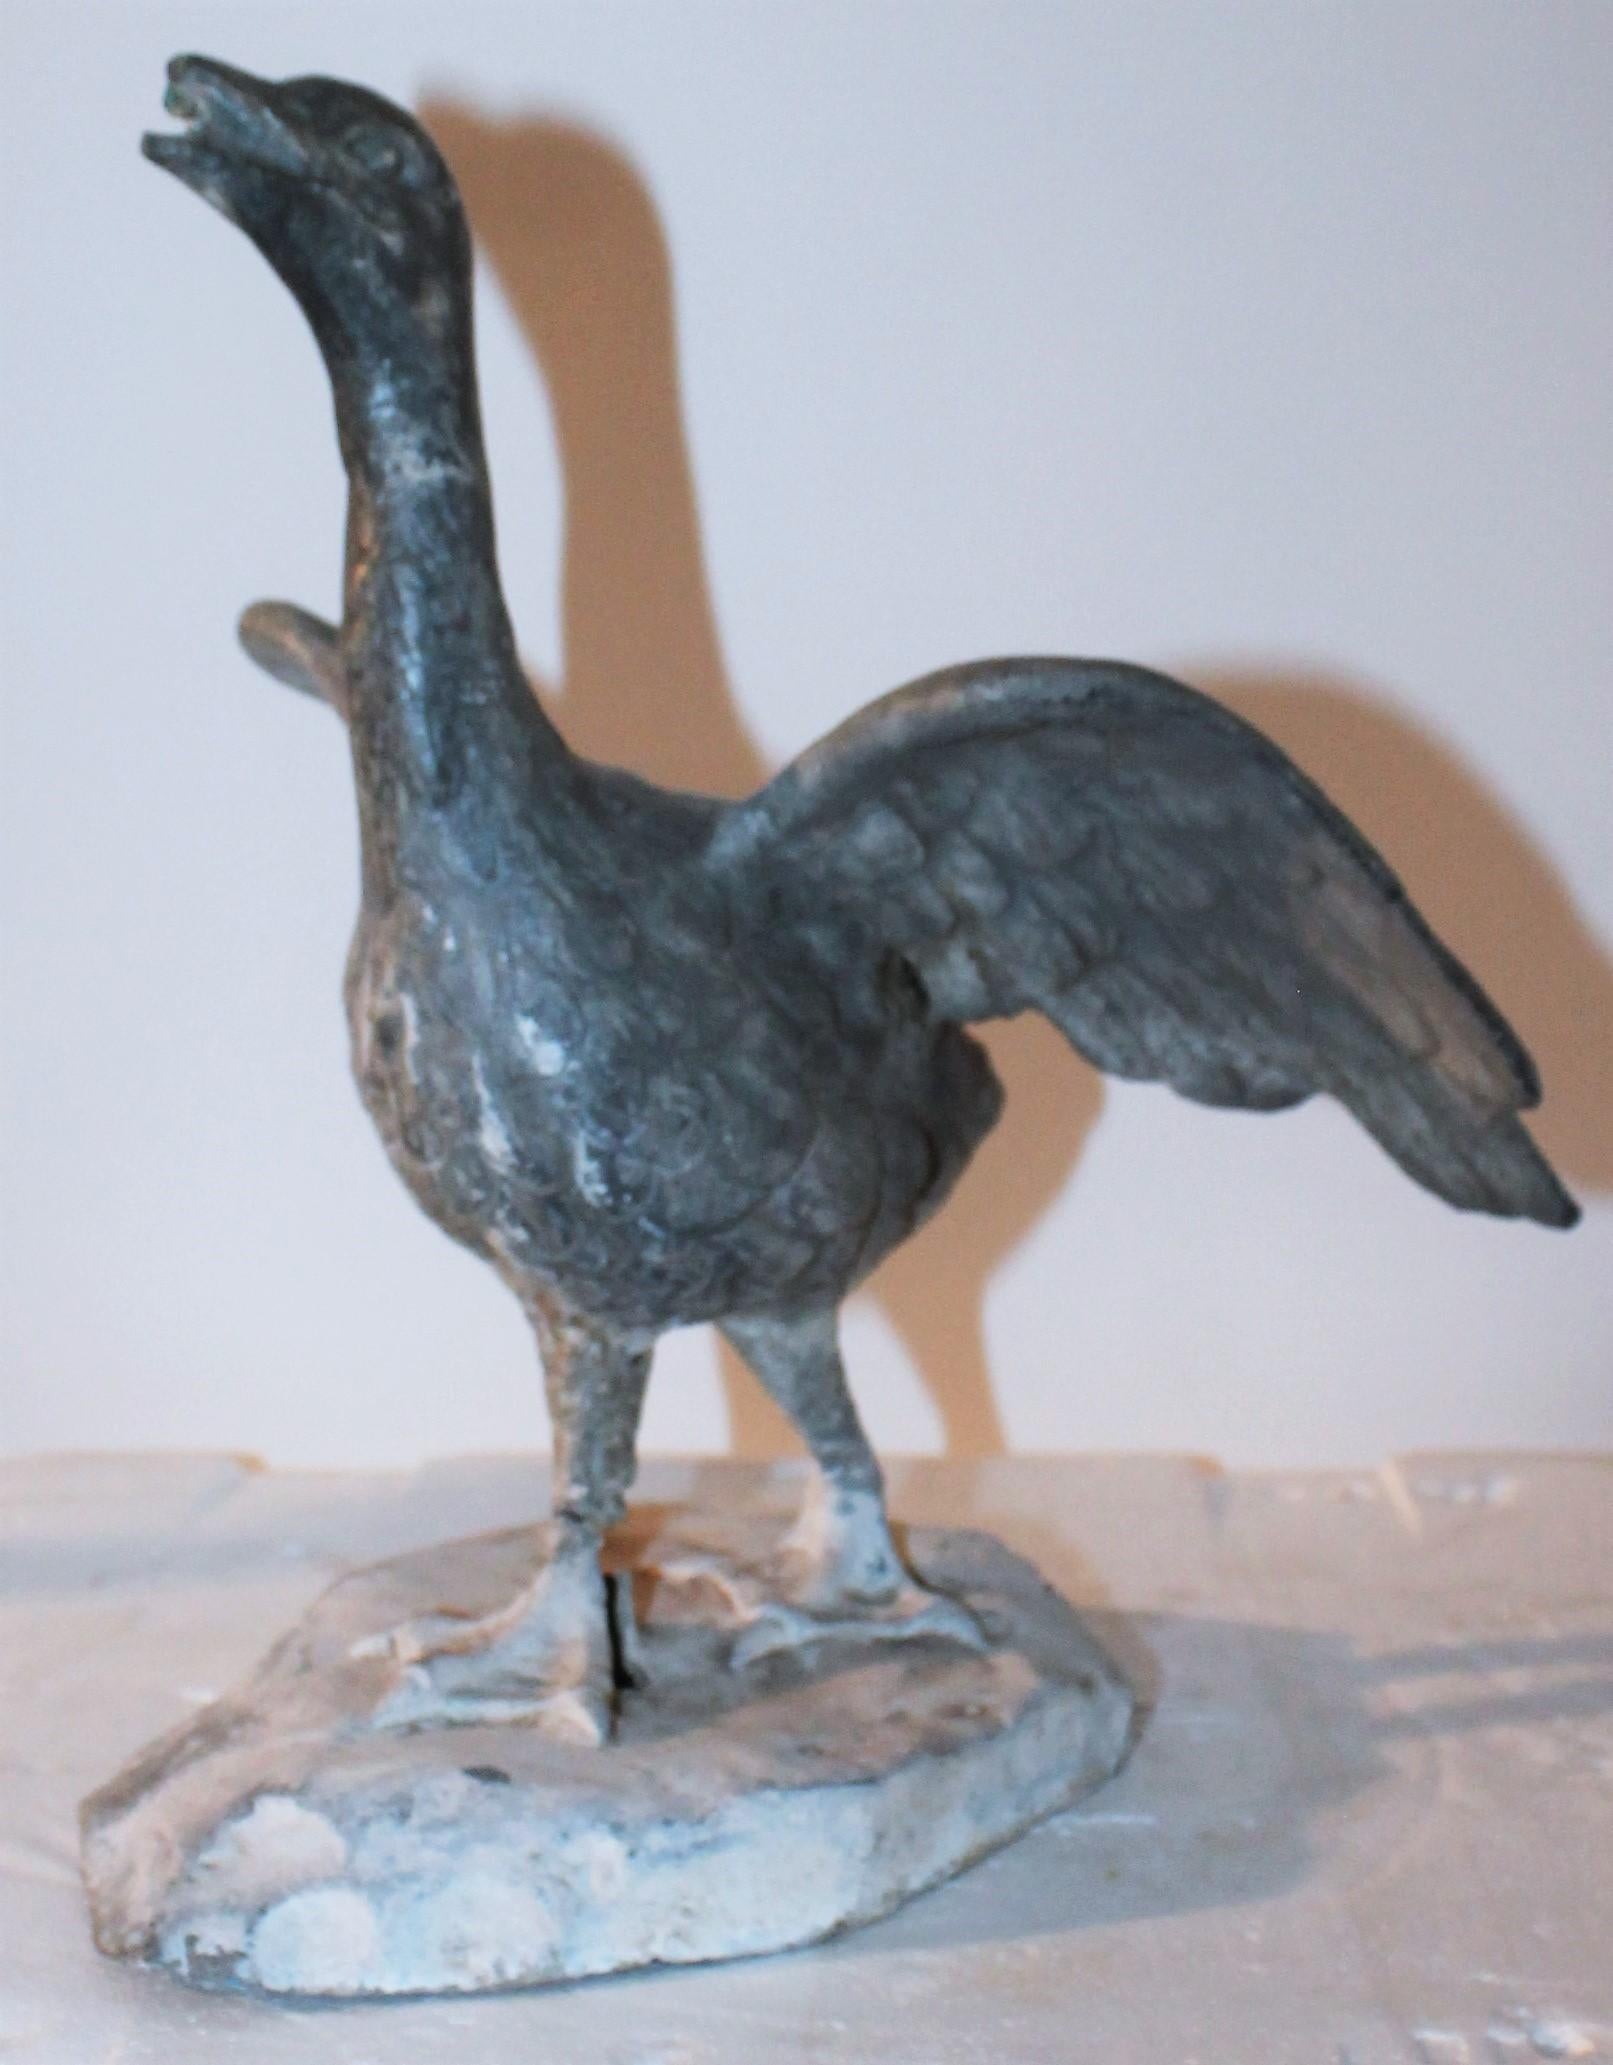 19th century Zinc Folk Art baby goose statue from a old fountain. The condition is good with some age wear.